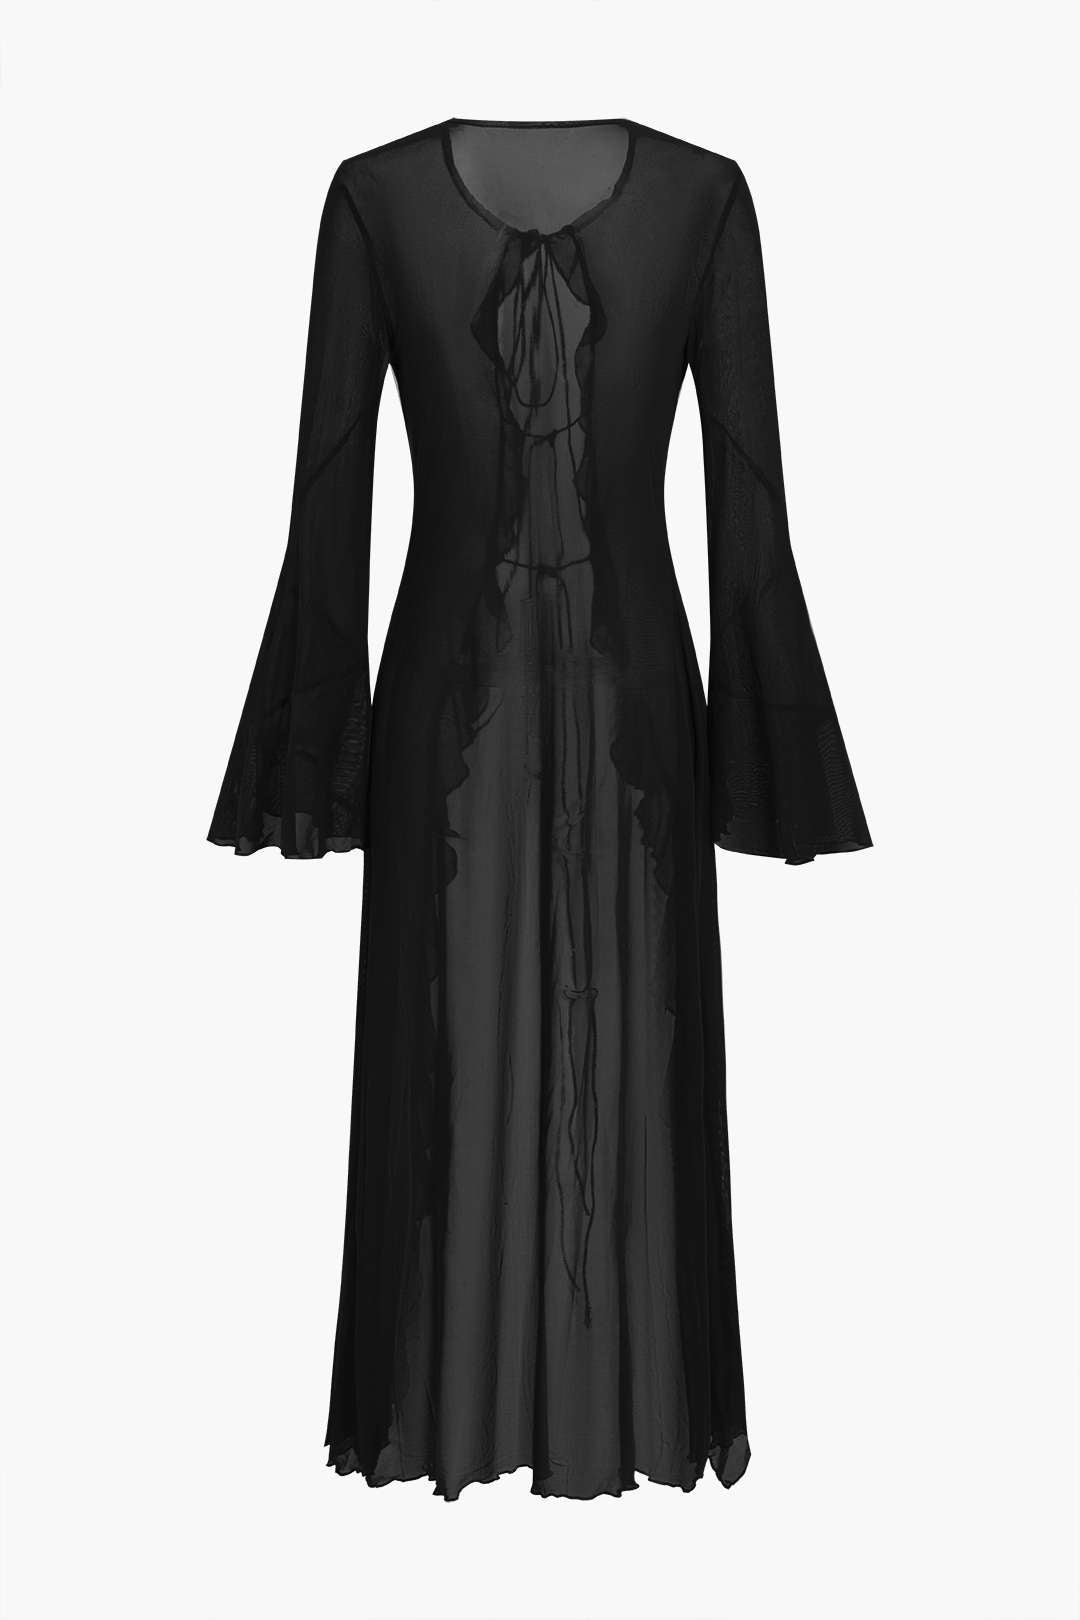 Sheer Mesh Tie Front Bell Sleeve Long Cover Up Dress